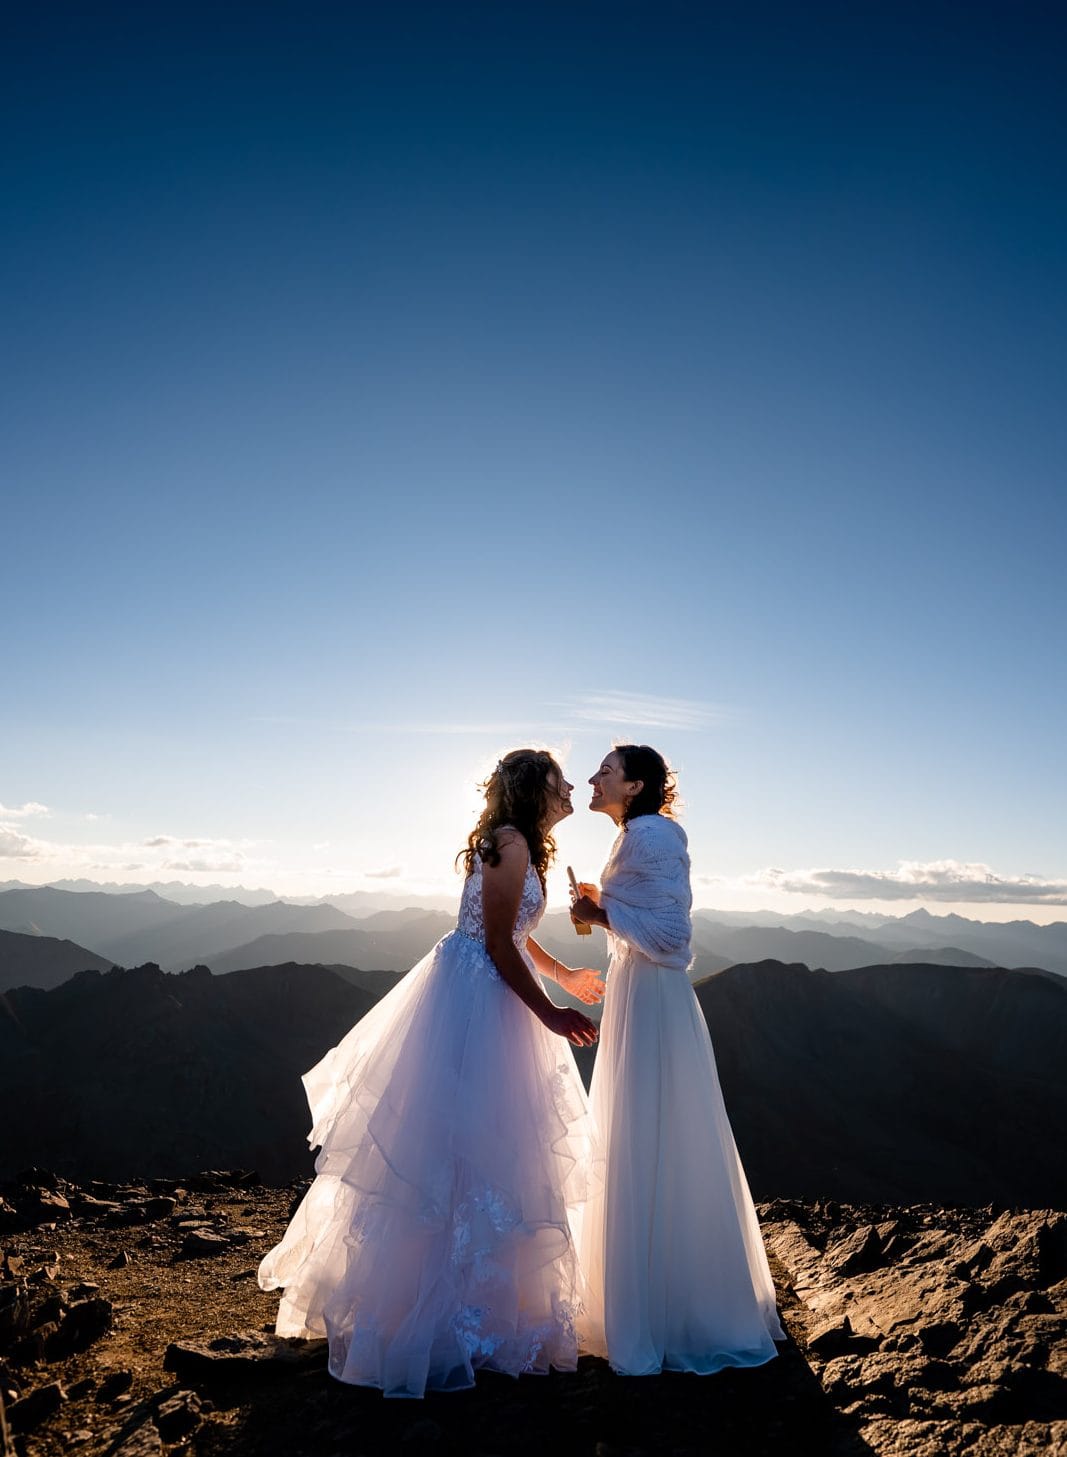 Colorado elopement photographer documents two brides on top of a 14er eloping in Colorado